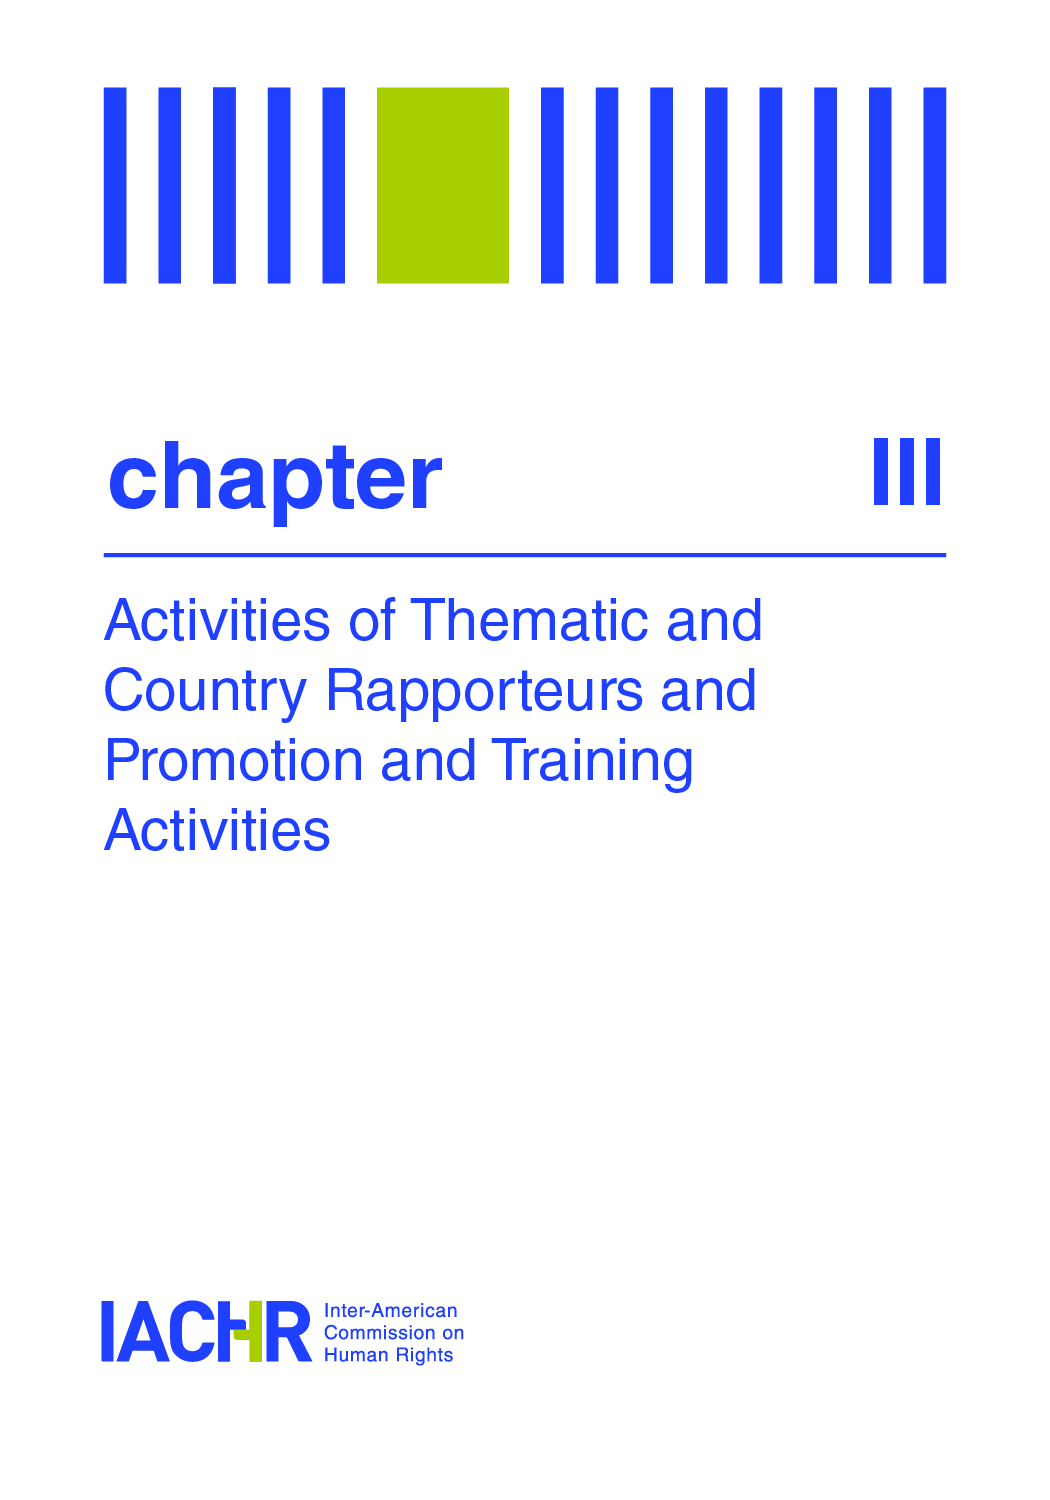 Activities of Thematic and Country Rapporteurs and Promotion and Training Activities